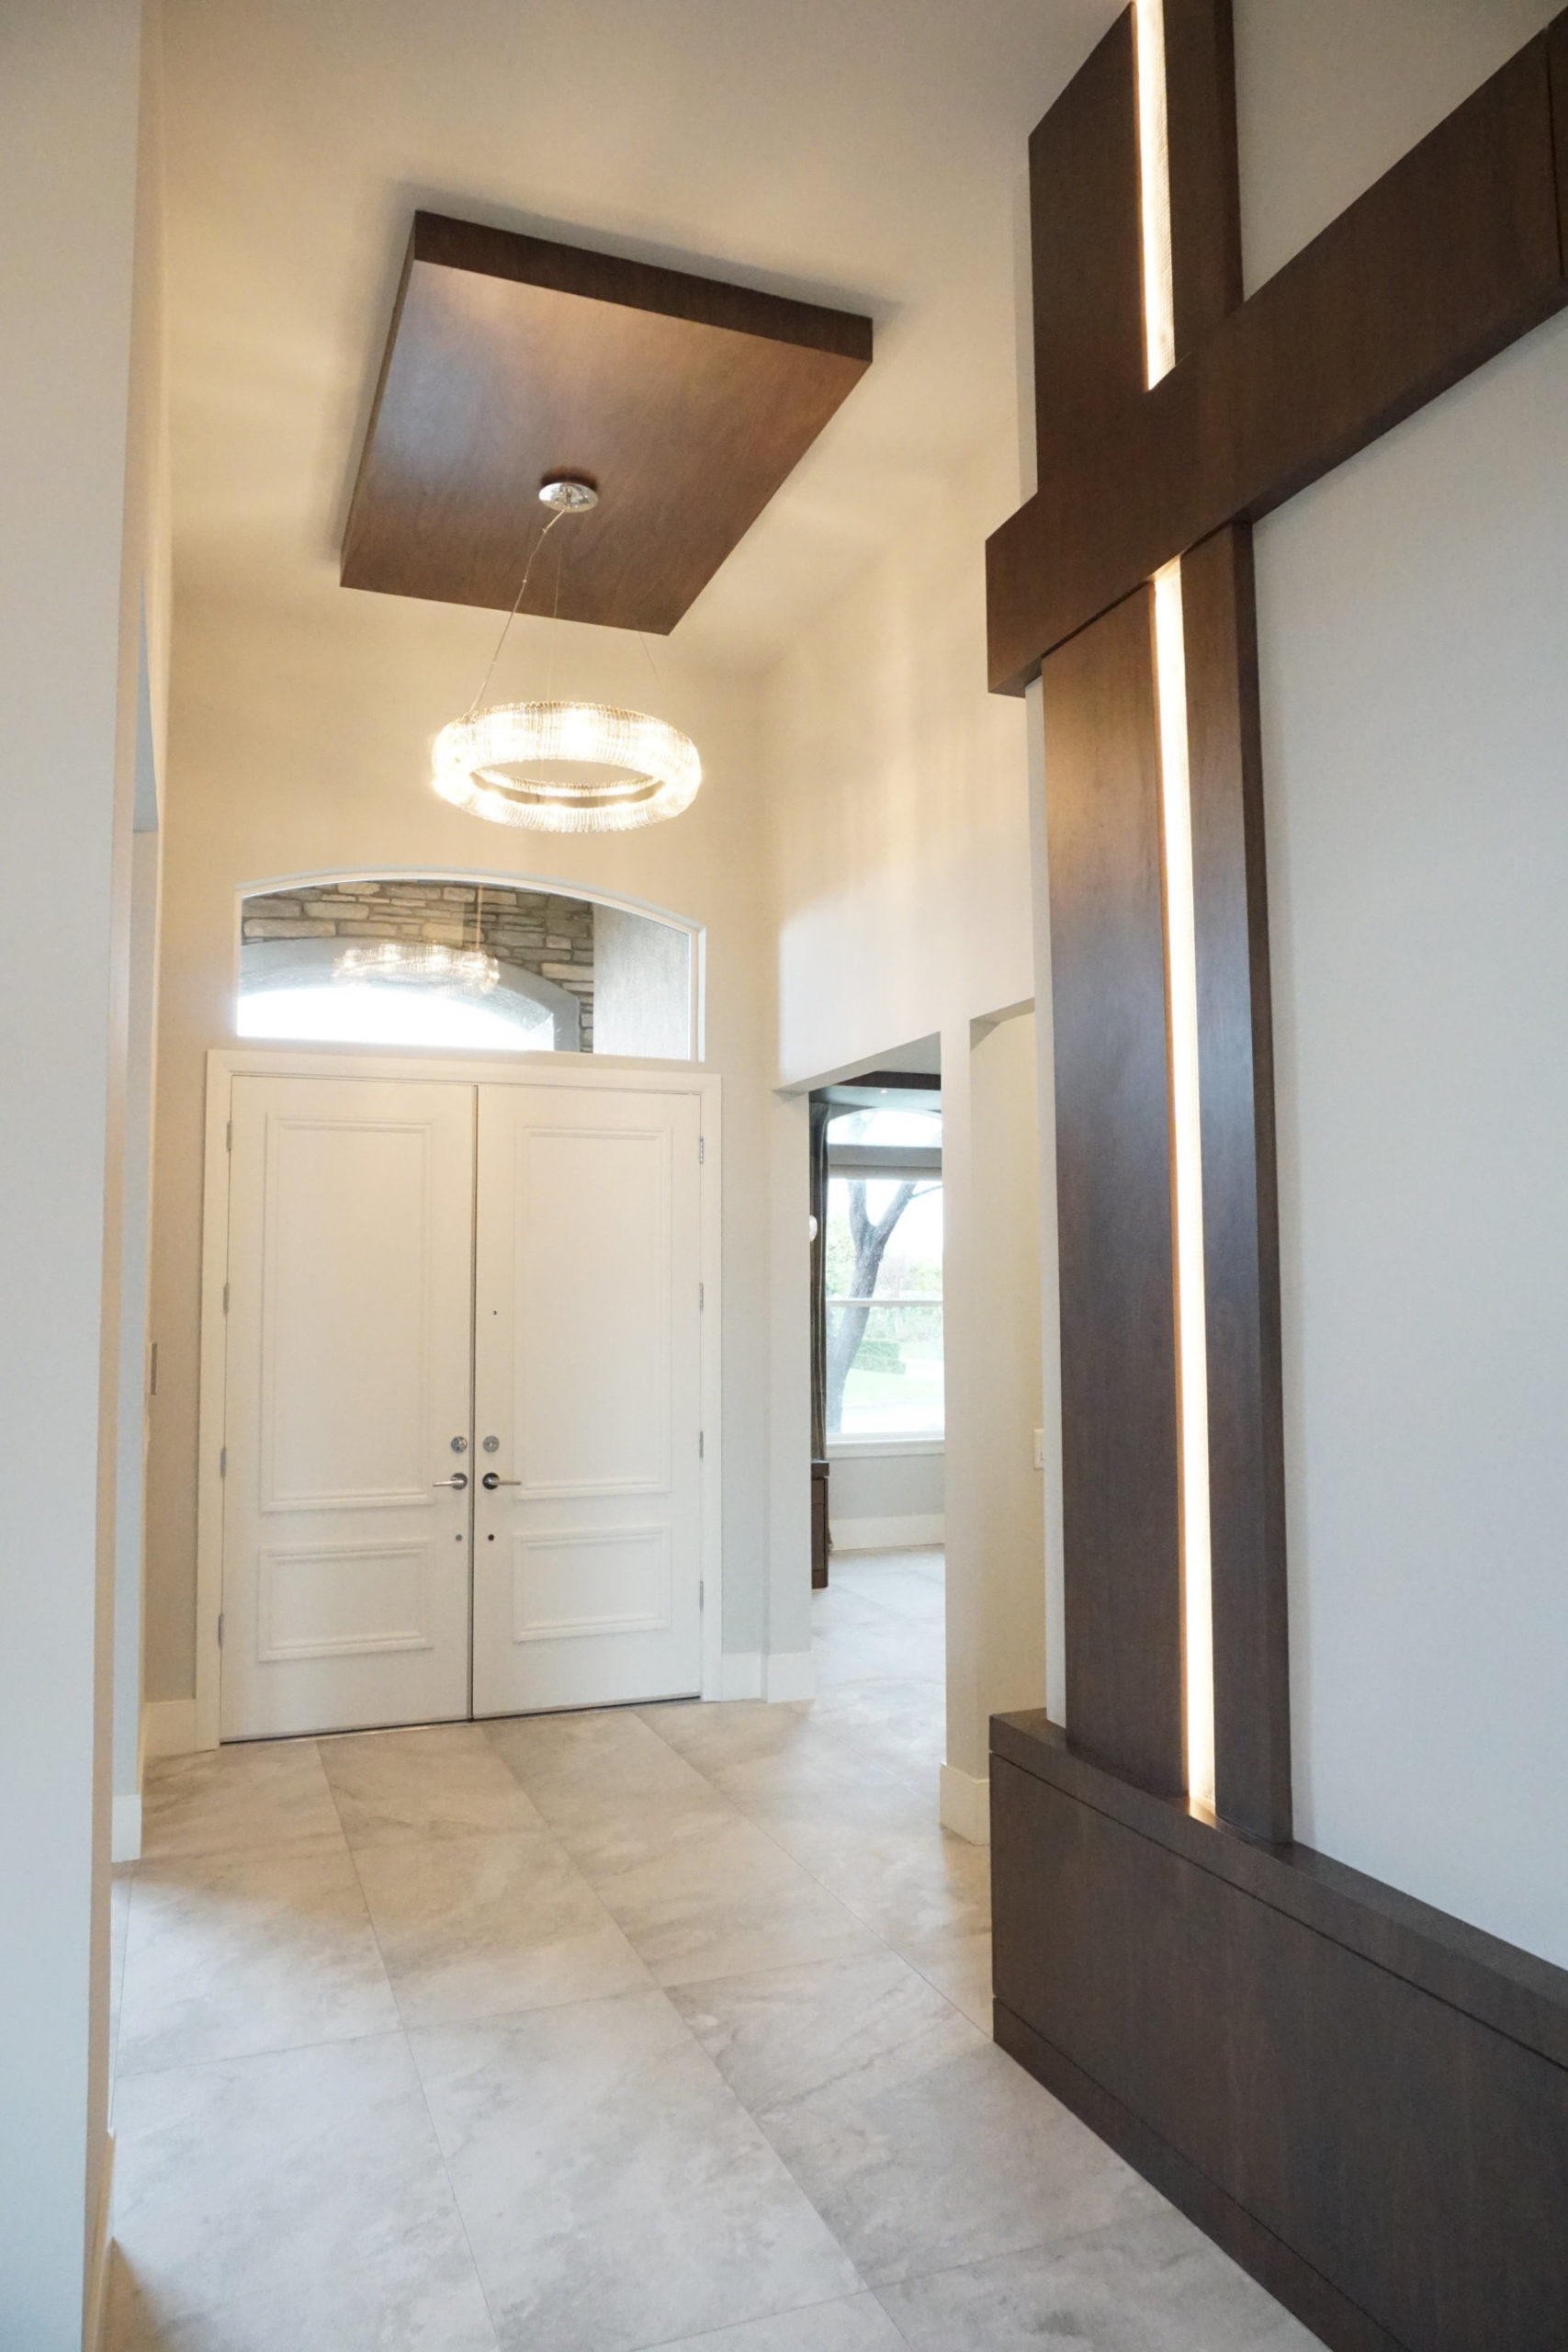 Front entry of home with light fixture and dark wood accents